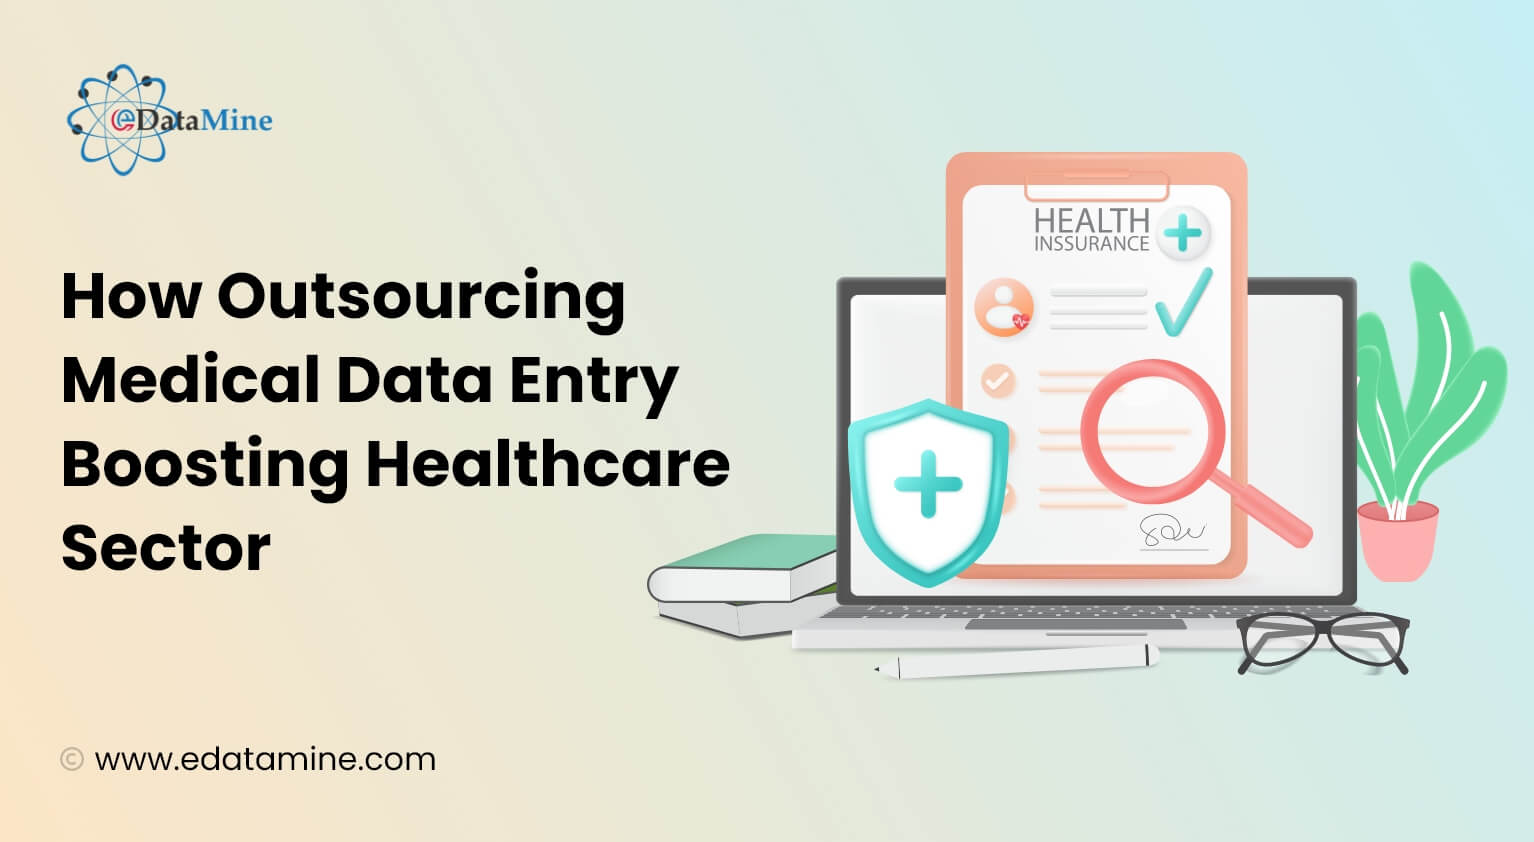 How Outsourcing Medical Data Entry Boosting Healthcare Sector